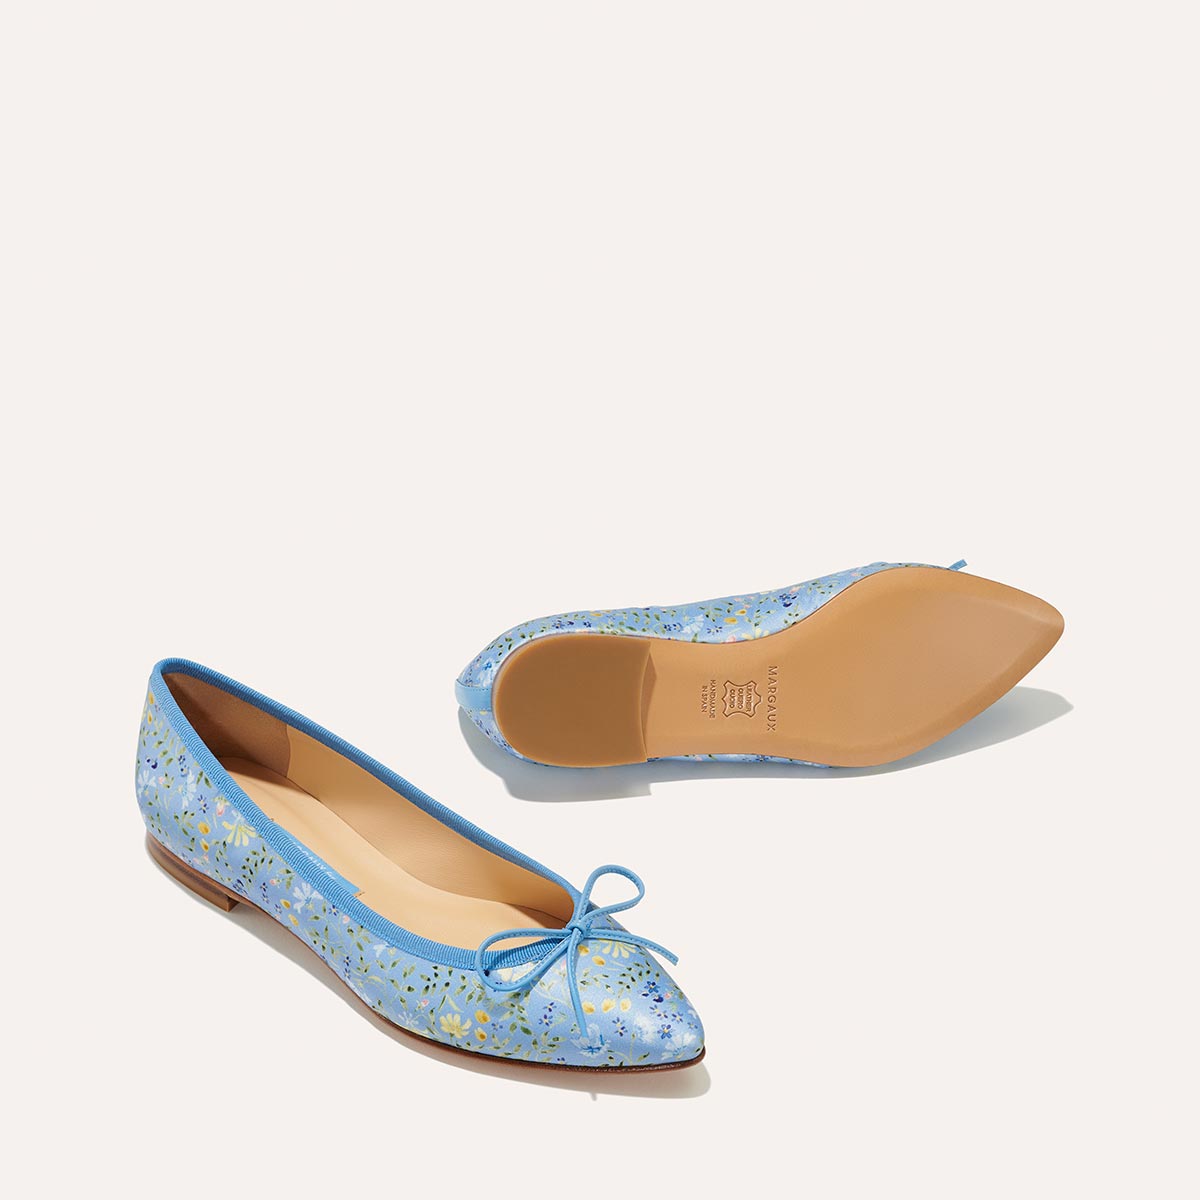 The Pointe - Blue Floral Satin